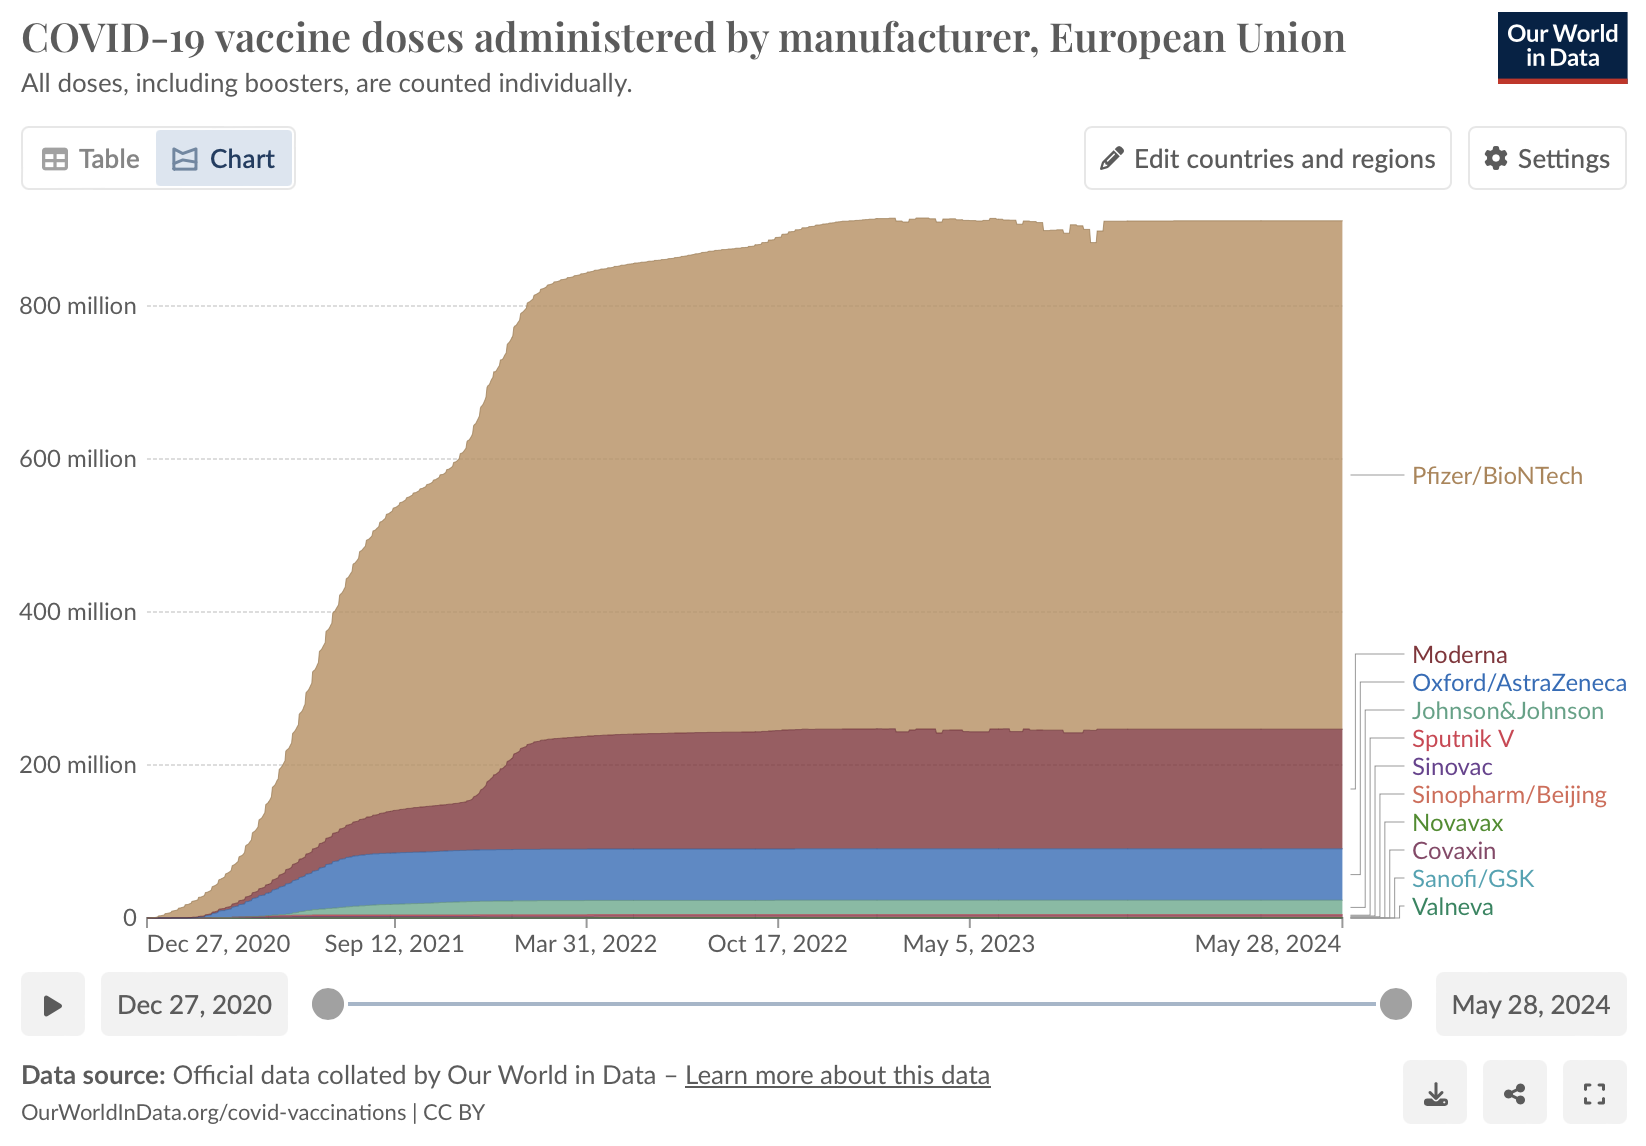 Density plot showing the number COVID-19 vaccine doses administered in the European Union by different manufacturers